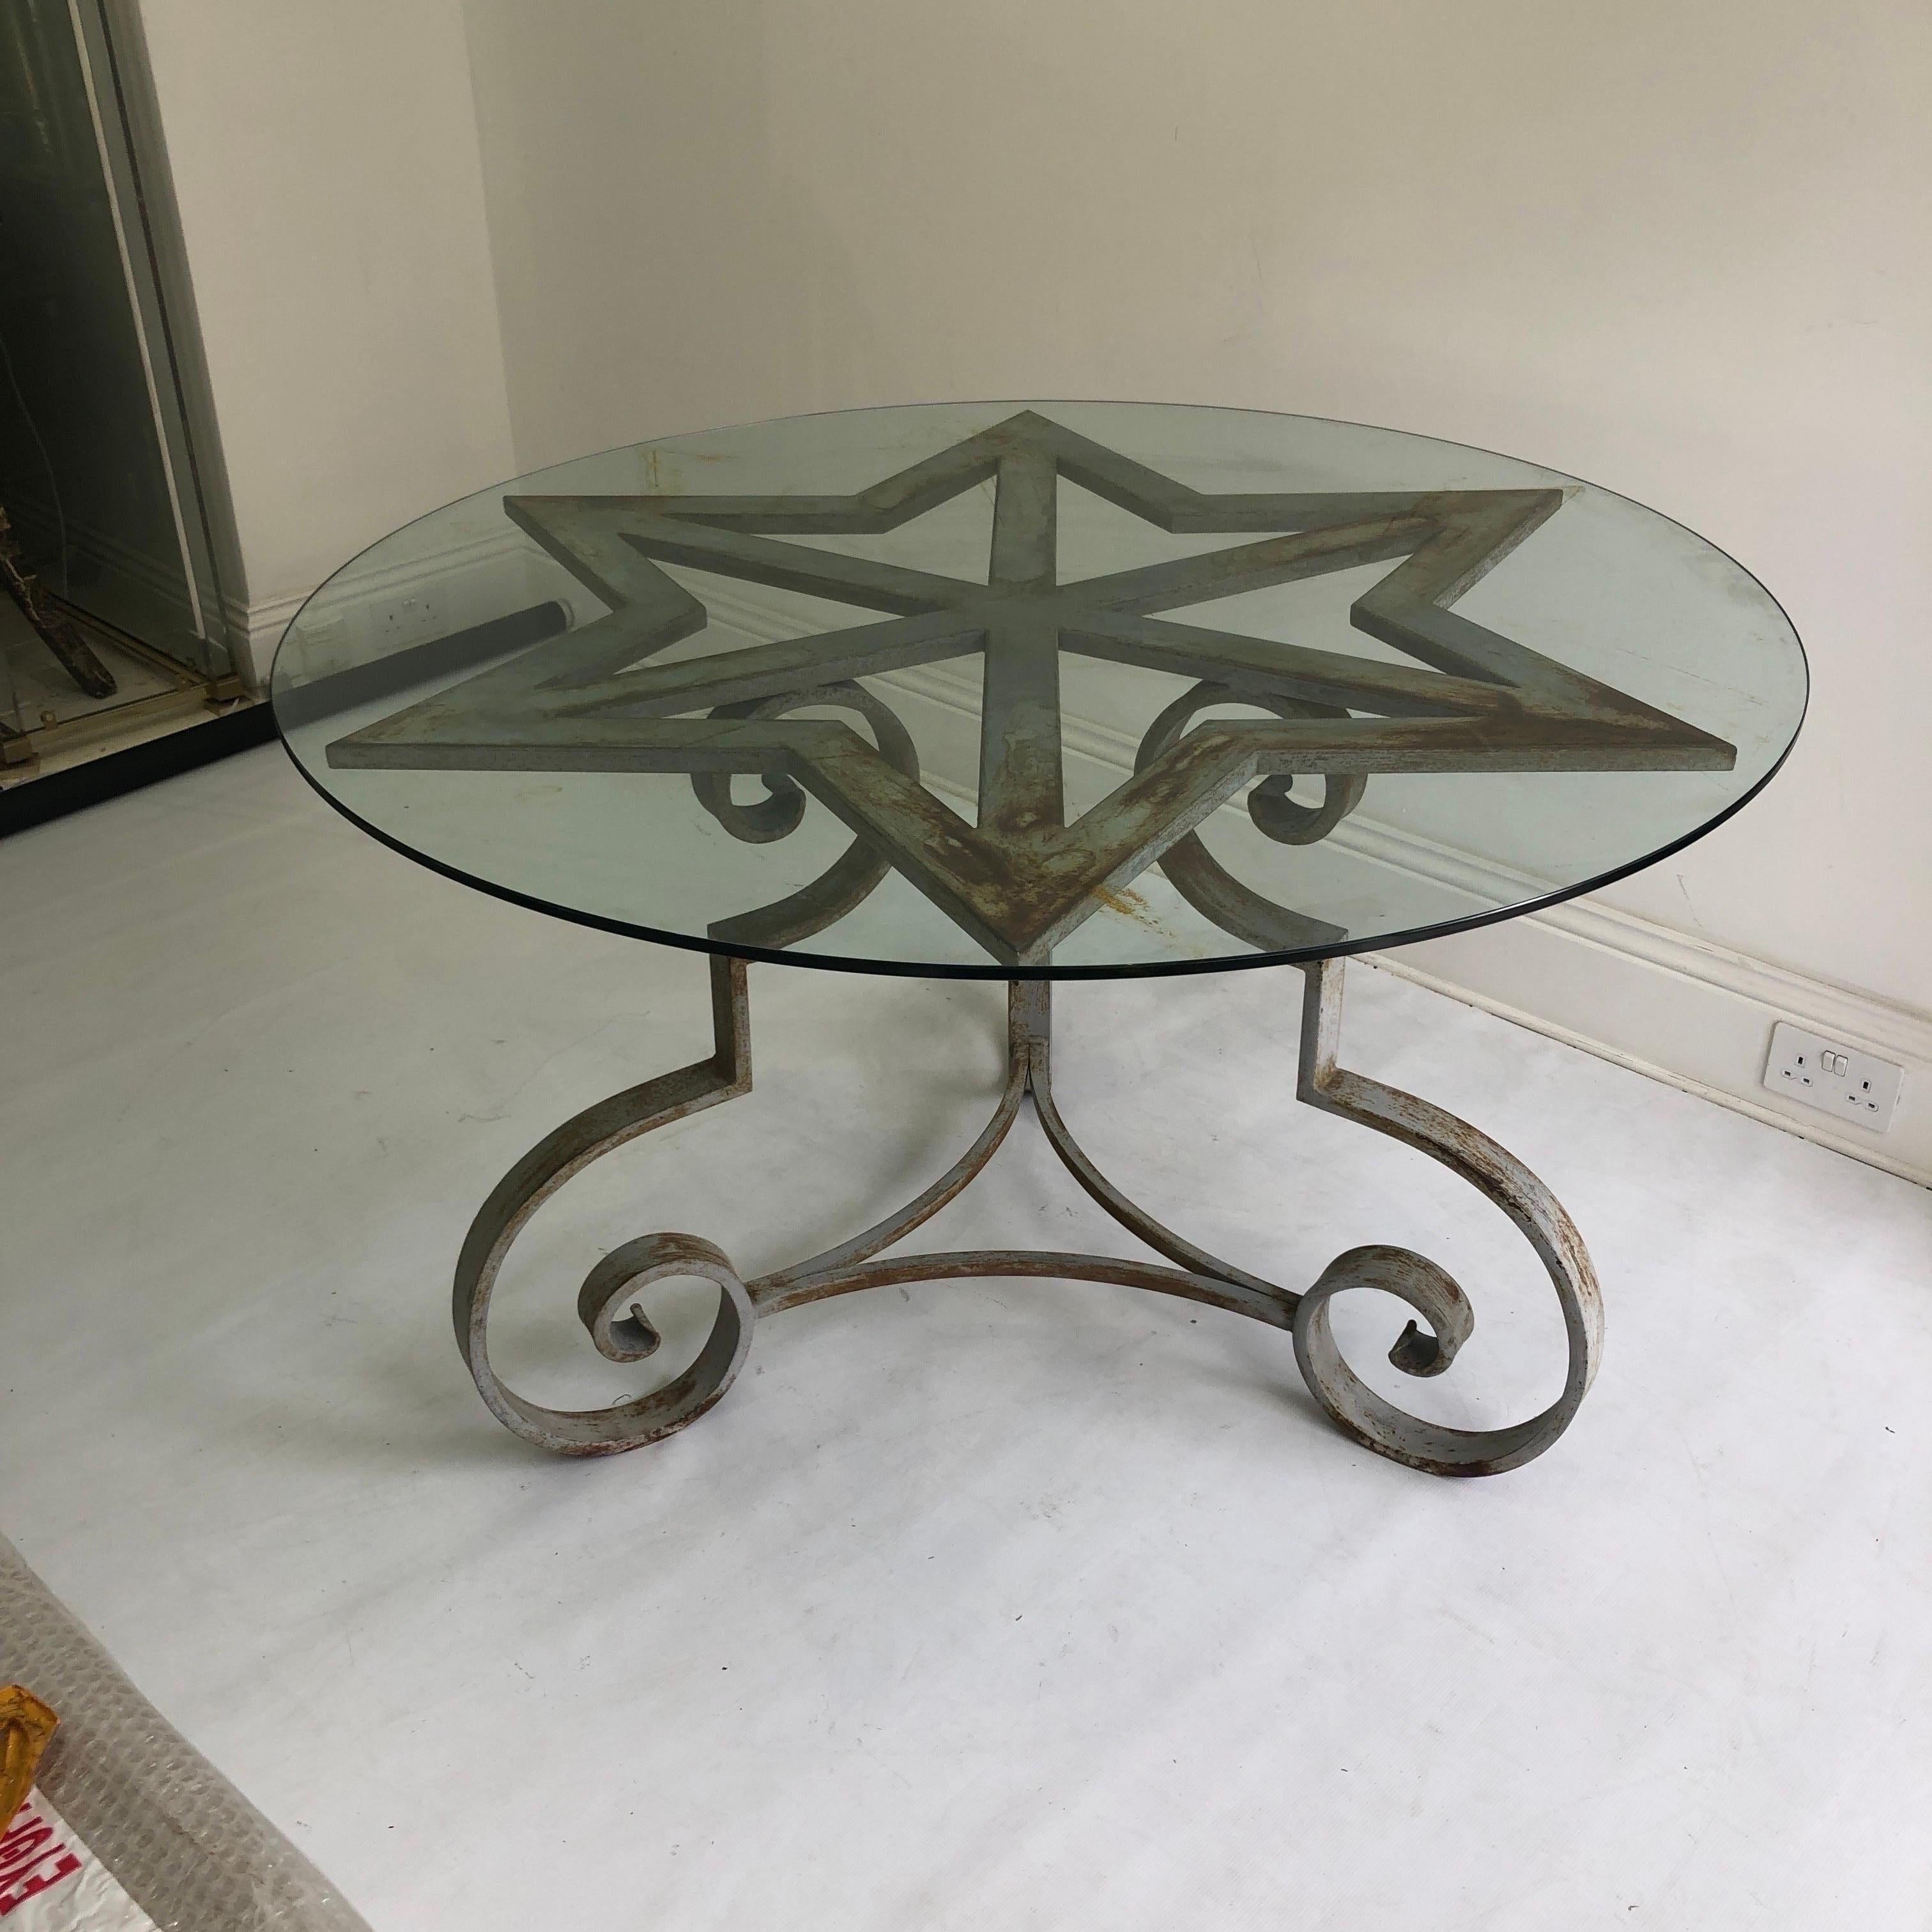 An amazing distressed star-shaped dining table made of pure cast iron. Fantastically angular, this sturdy table is completed with a round glass top. Three swirling feet, with touches of the neoclassical, support the six-pointed star. 
Due to the